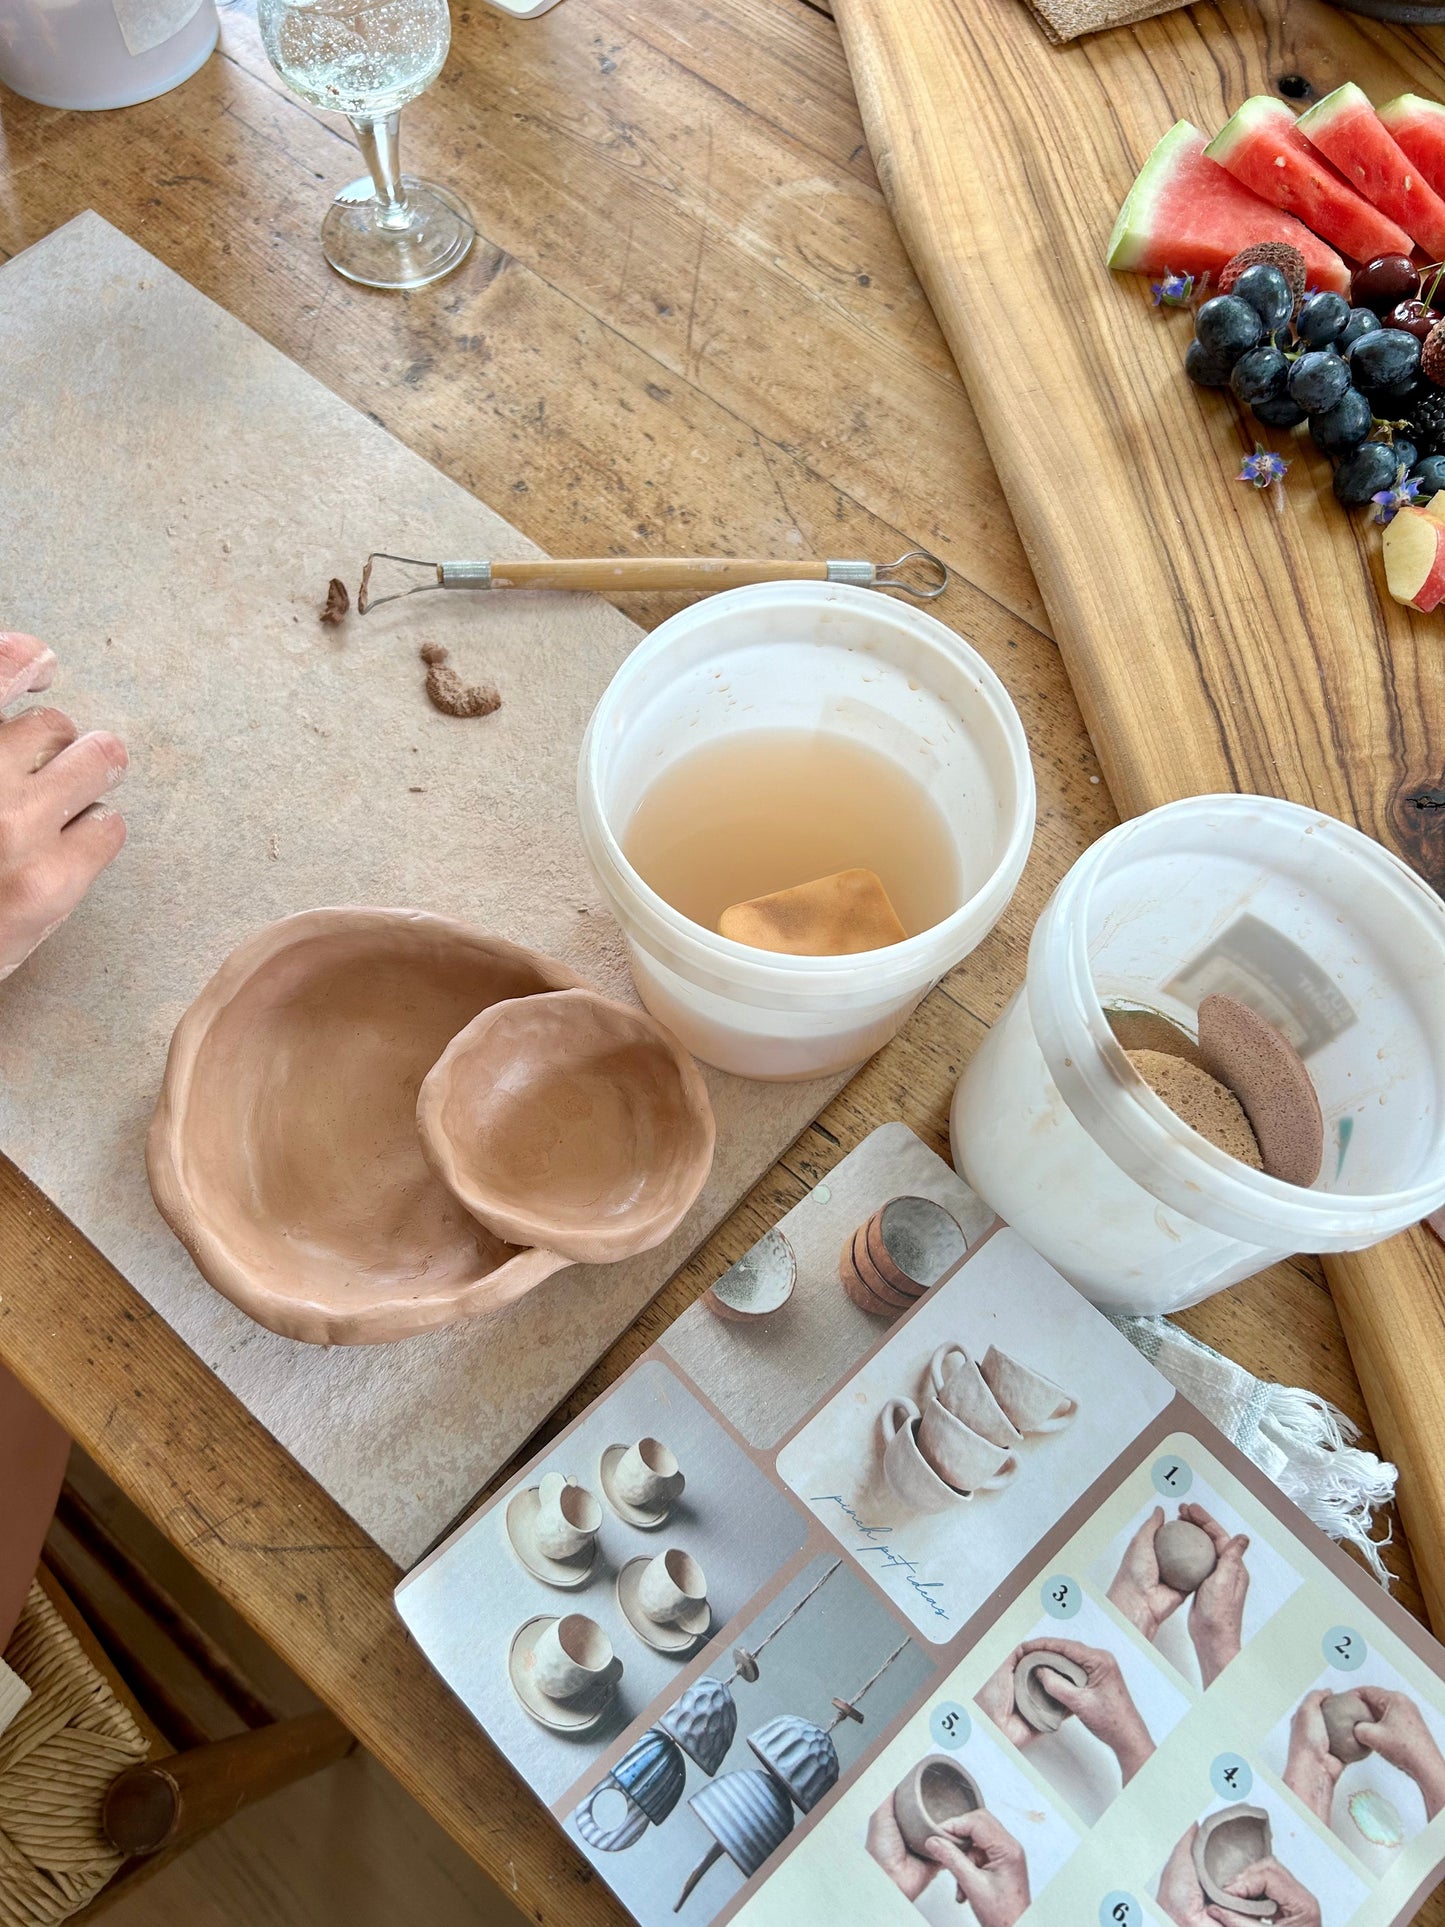 Pottery Workshop - June (new date added)